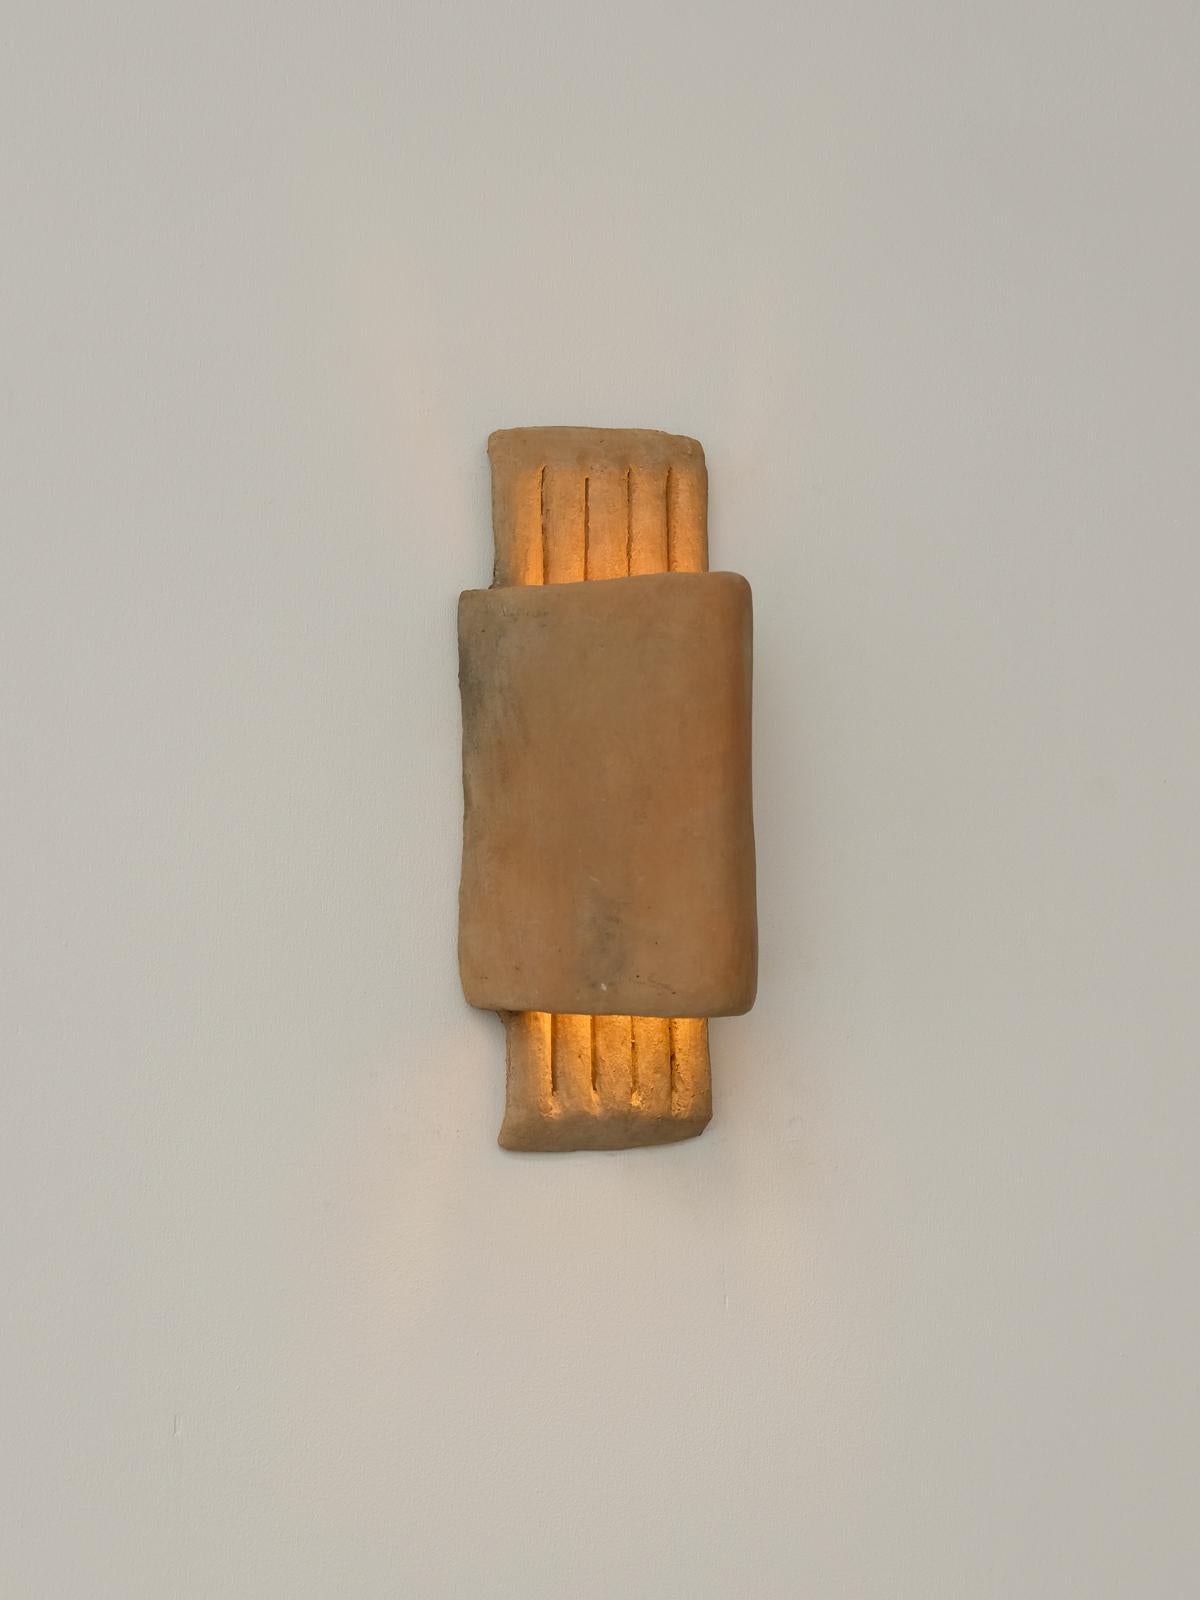 Hand-Crafted Terracotta contemporary Ceramic Wall Light Made of local Clay, handcrafted For Sale